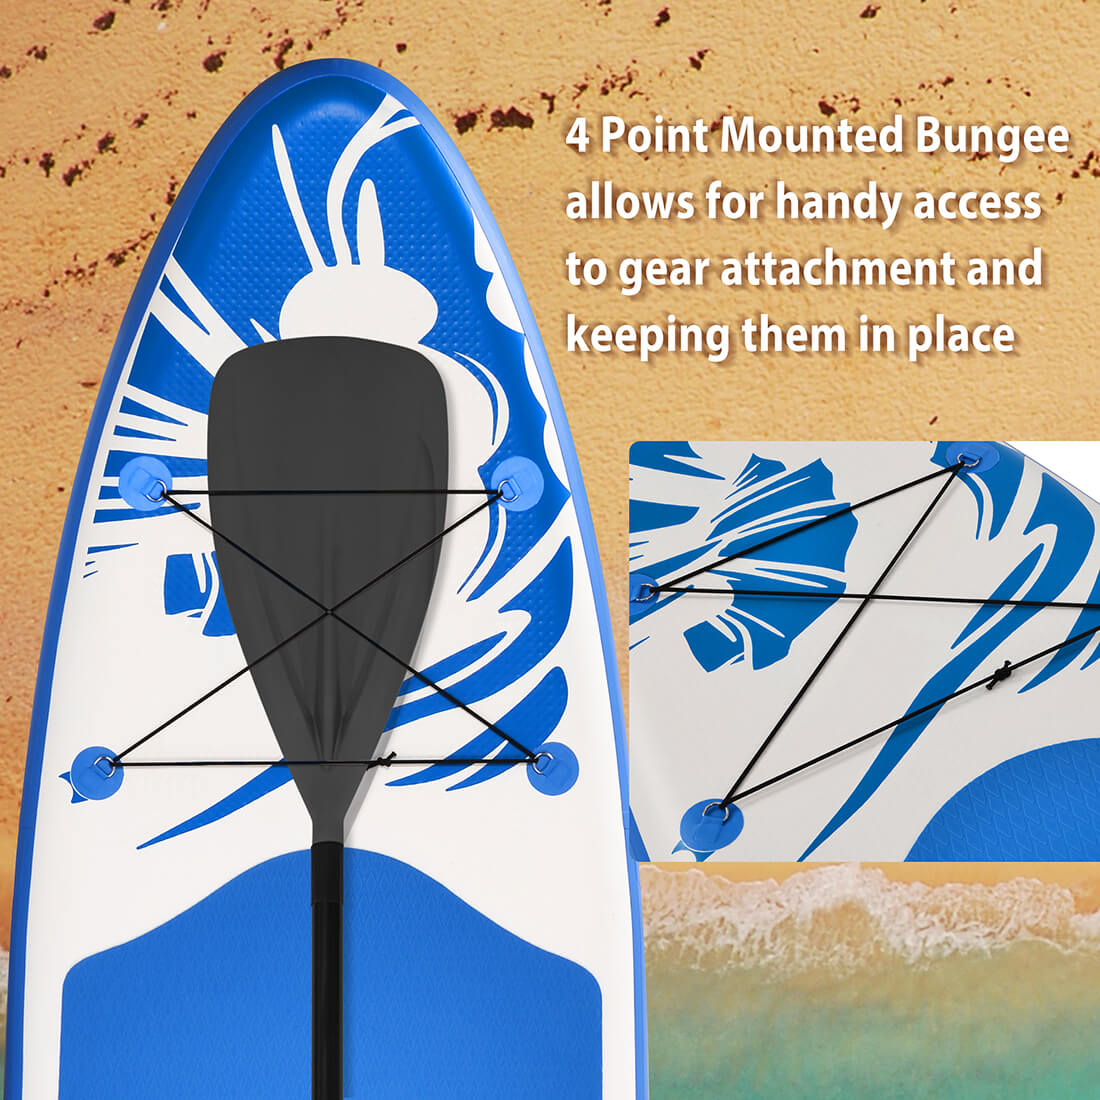 Inflatable Stand Up Paddle Board, 10'6/11'SUP Surfboard With Premium SUP  Accessories